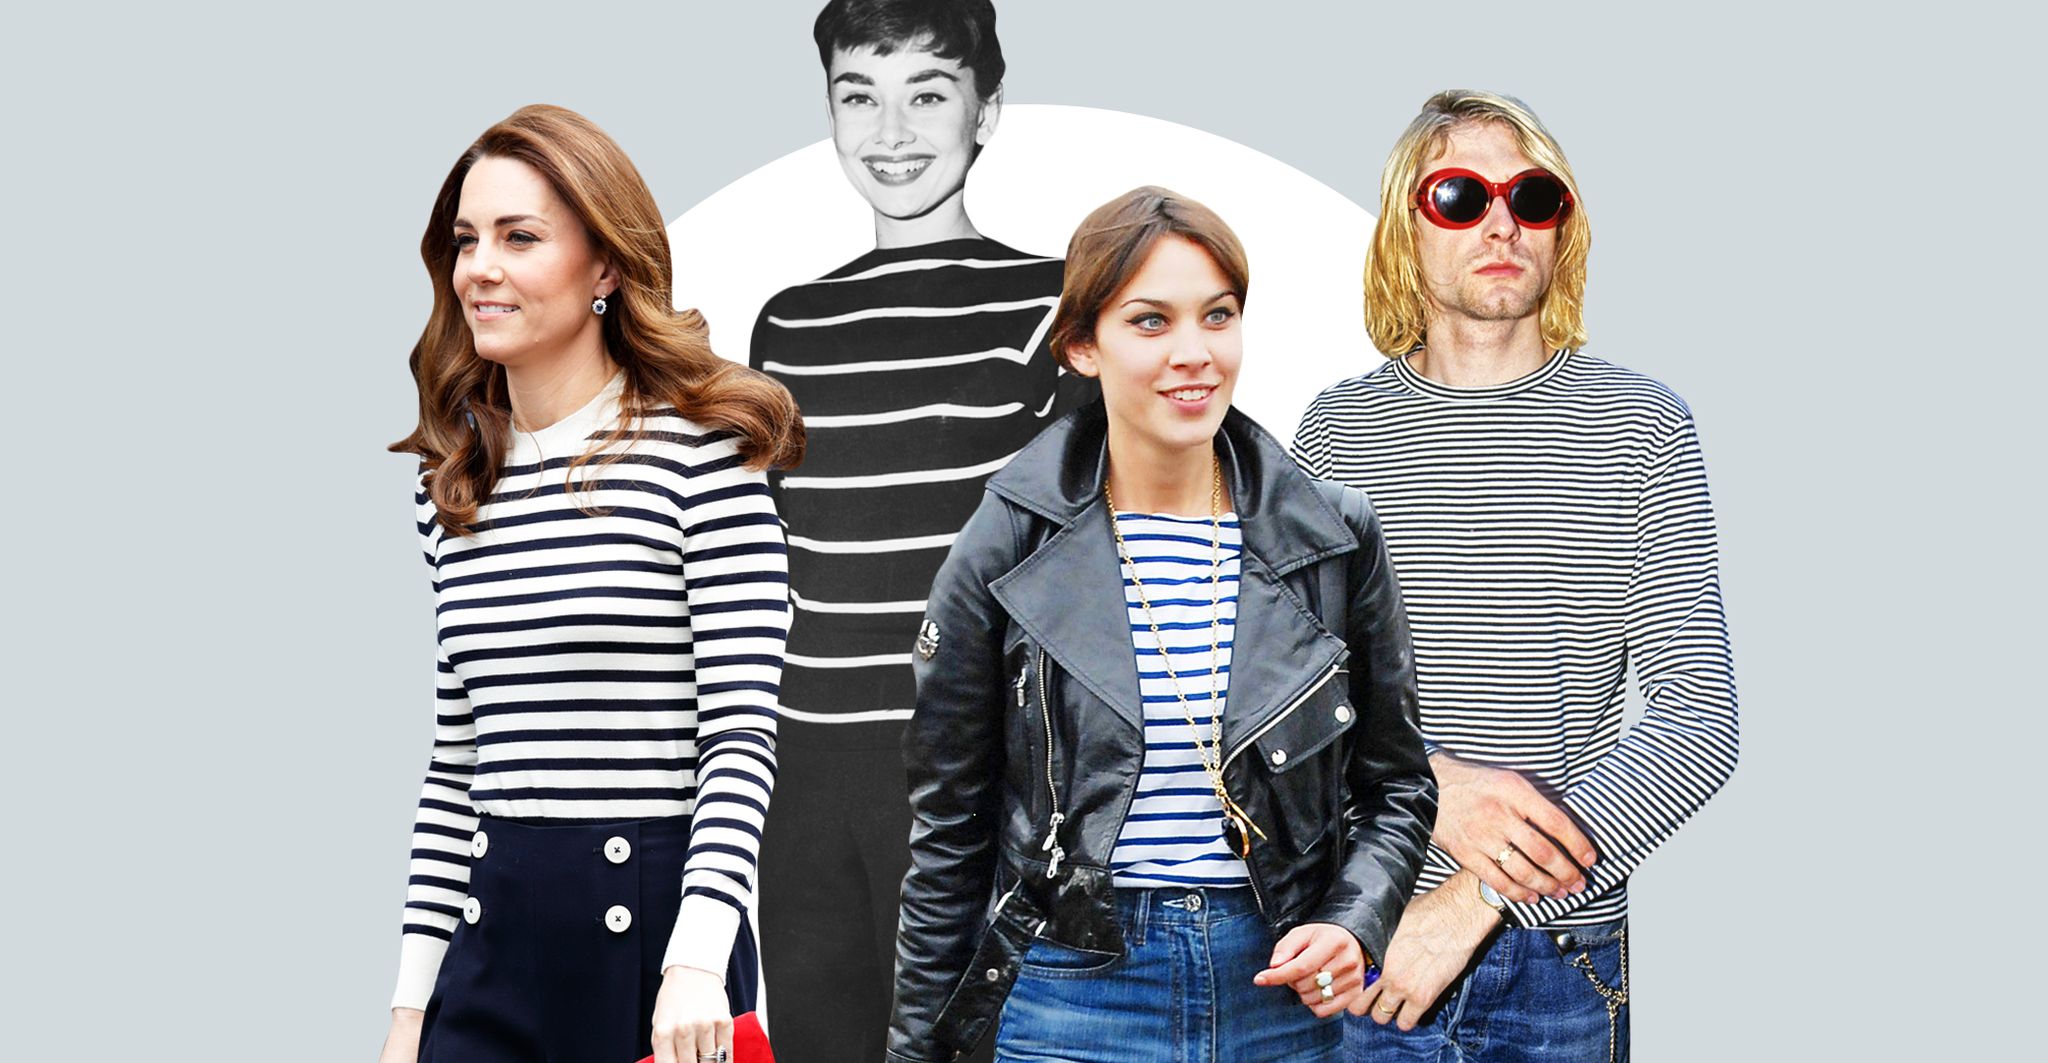 The Marinière: The French Striped Shirt That Never Goes Out of